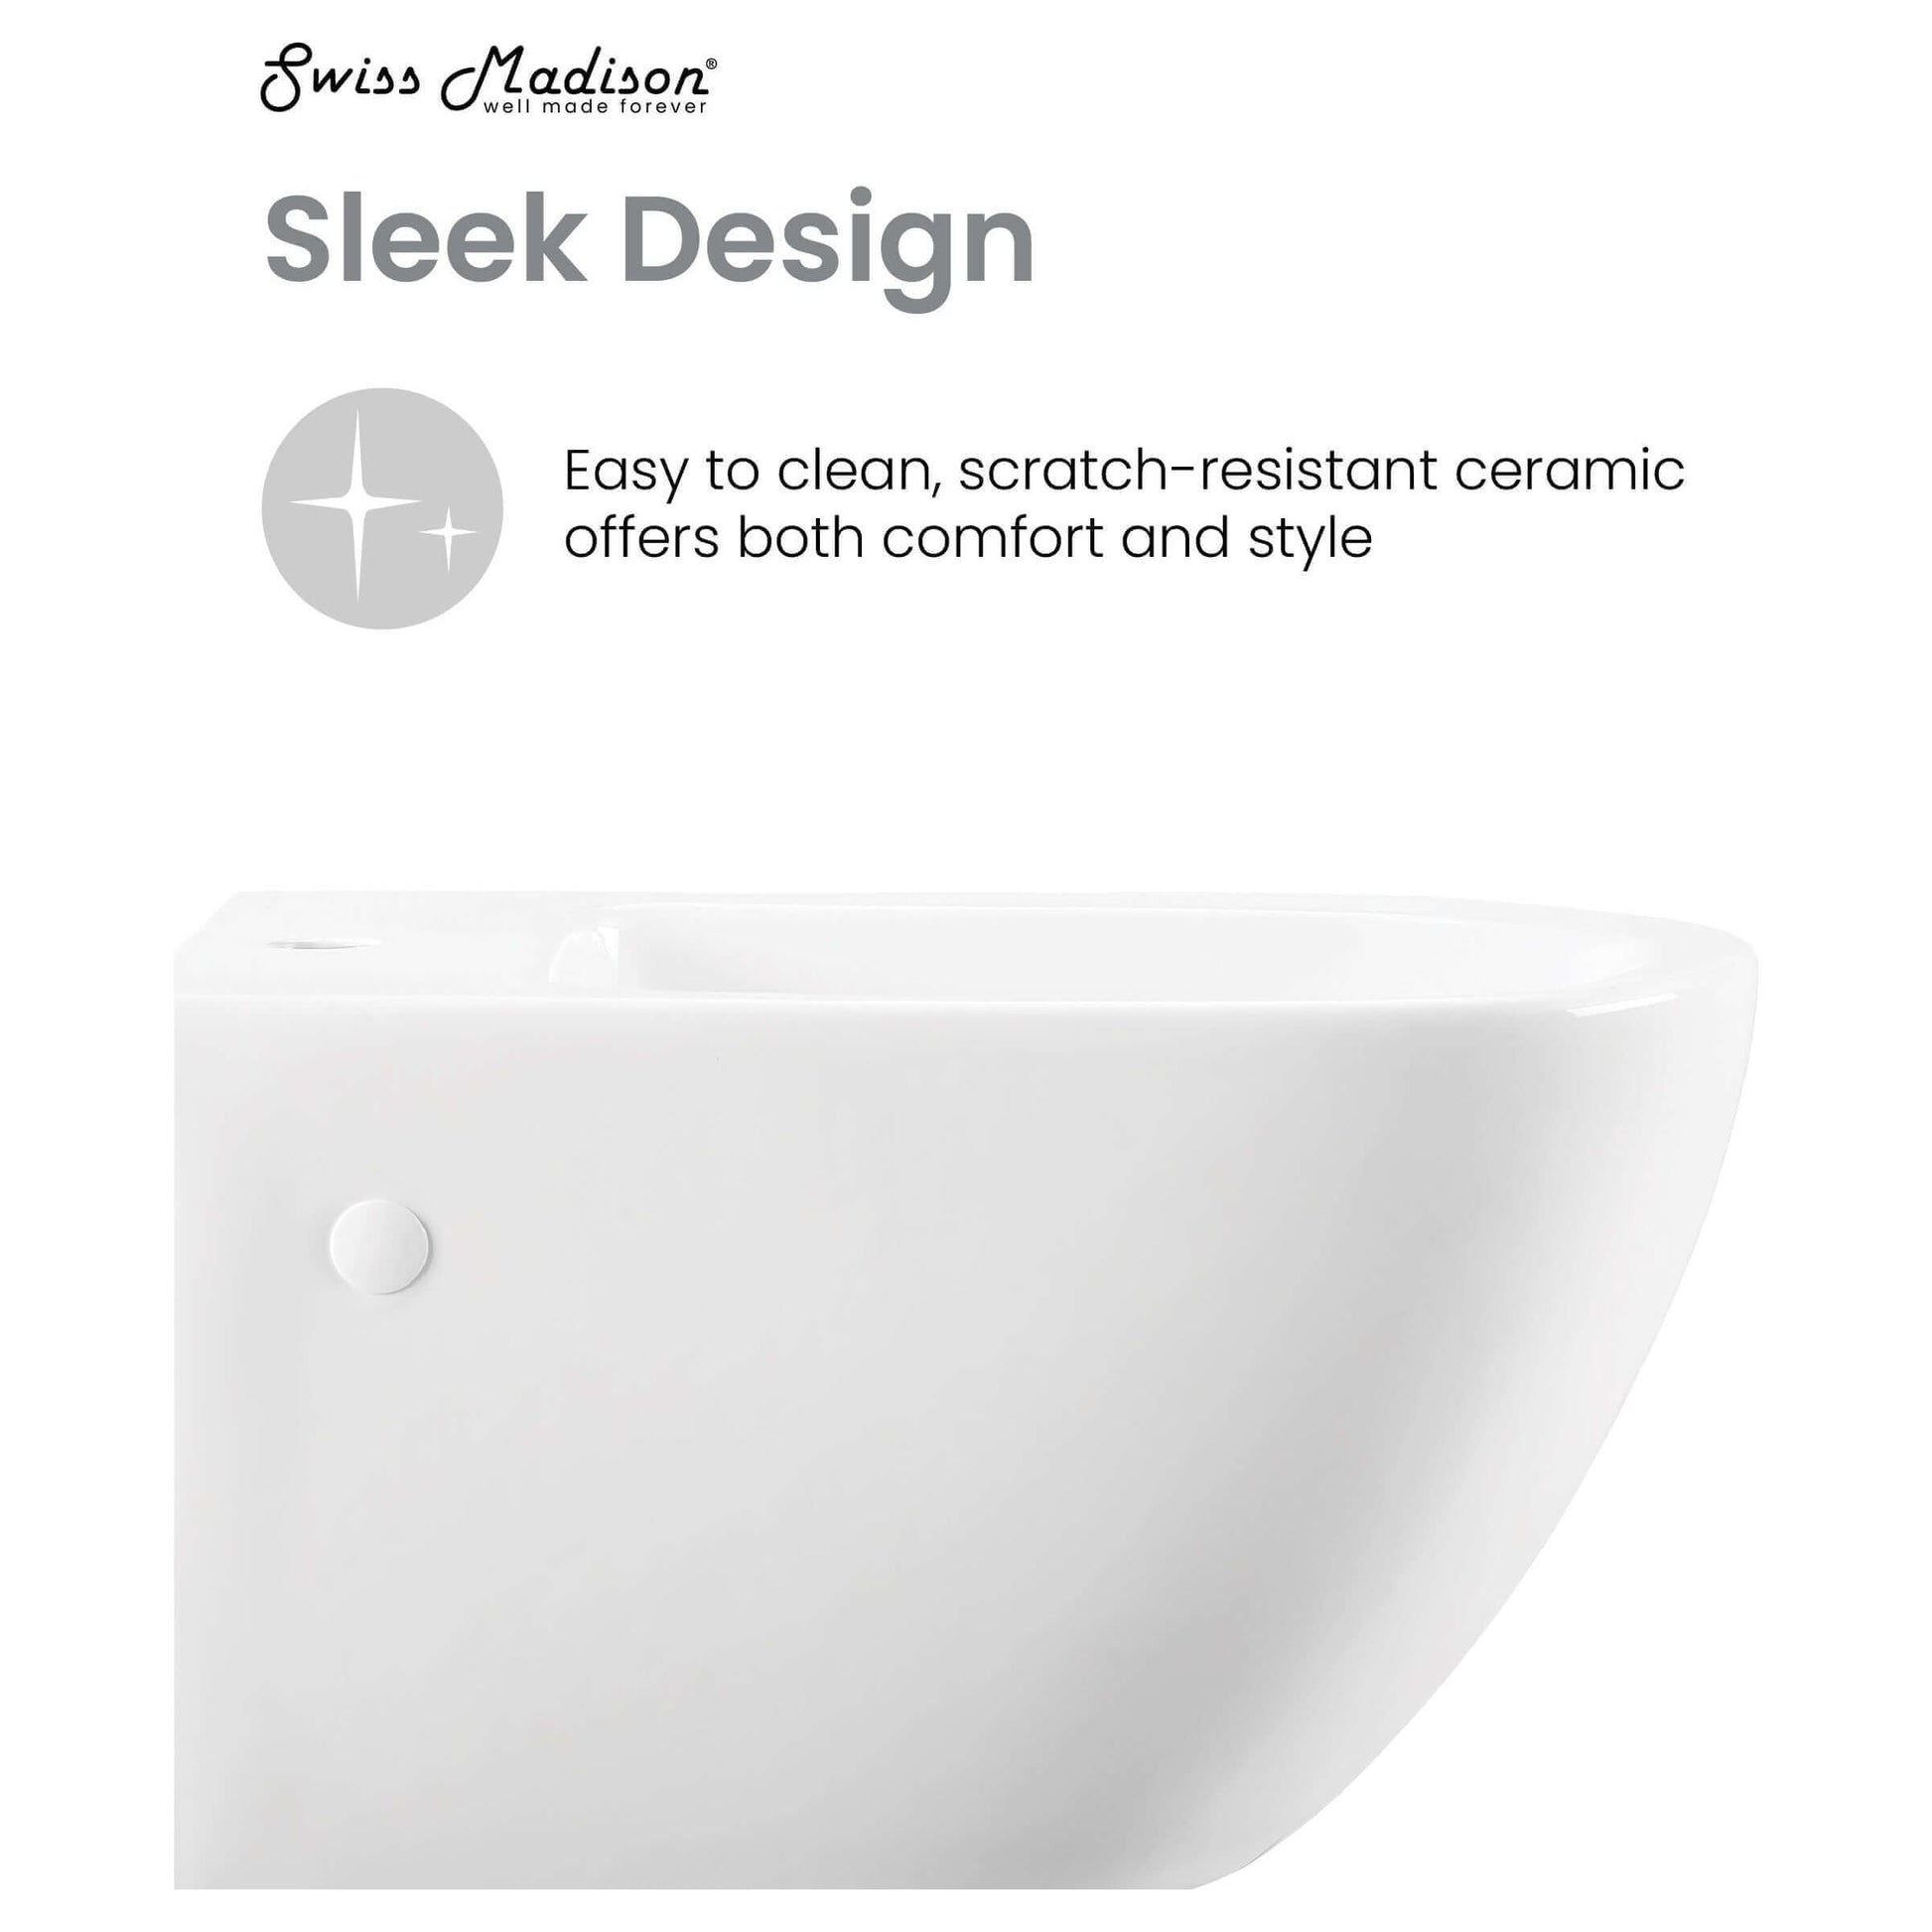 St. Tropez Wall Hung Bidet - side view with features listed